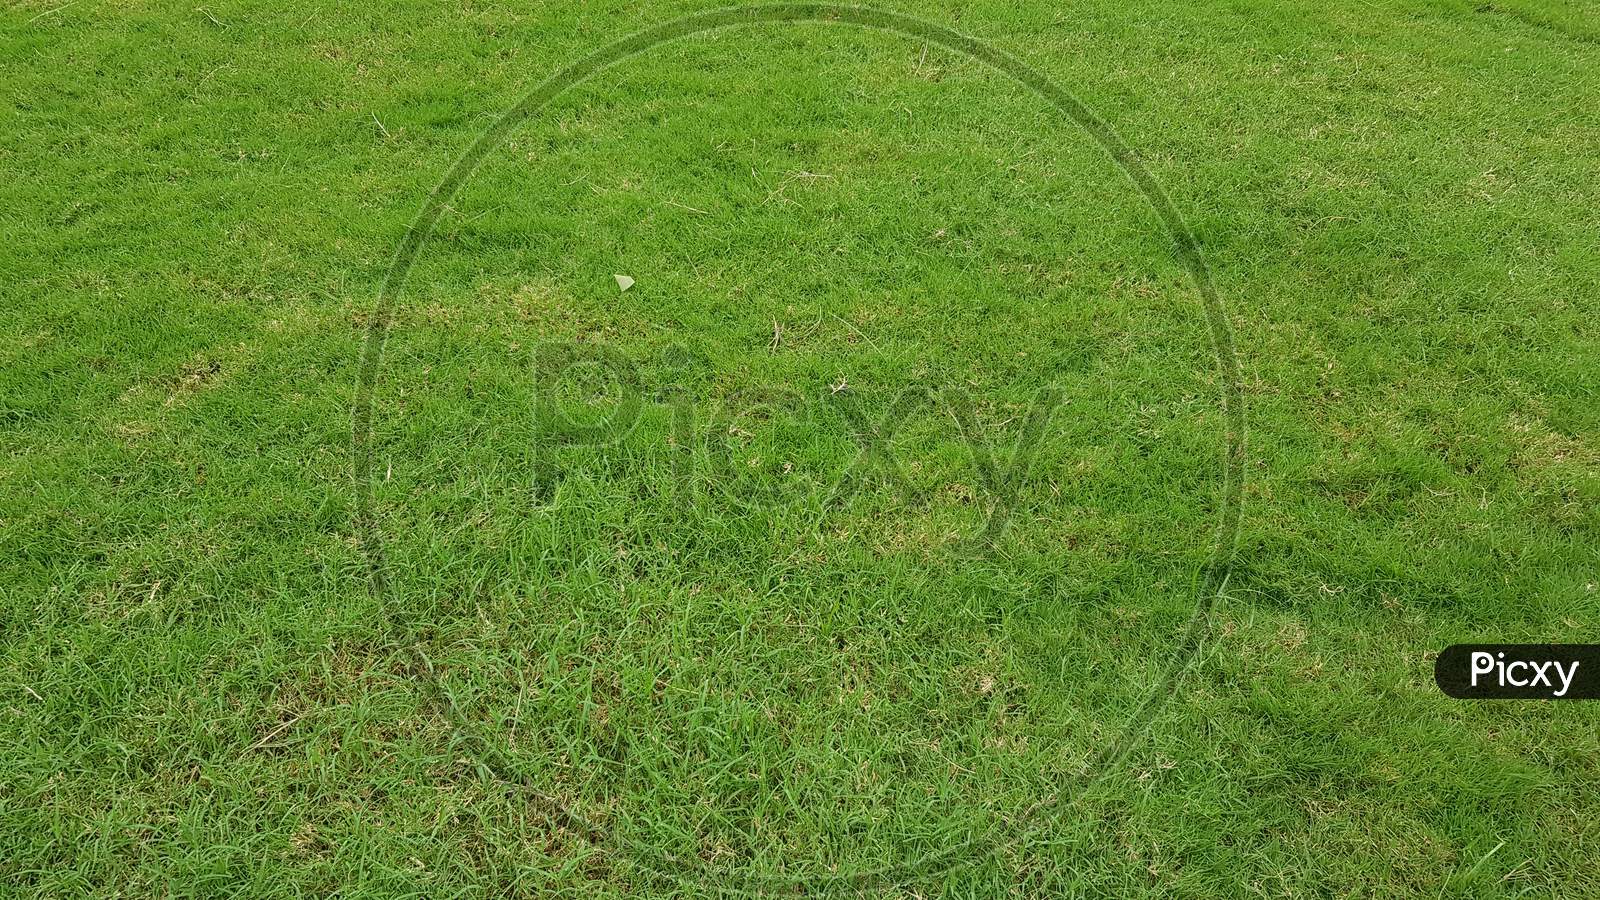 Green grass pattern and texture for background